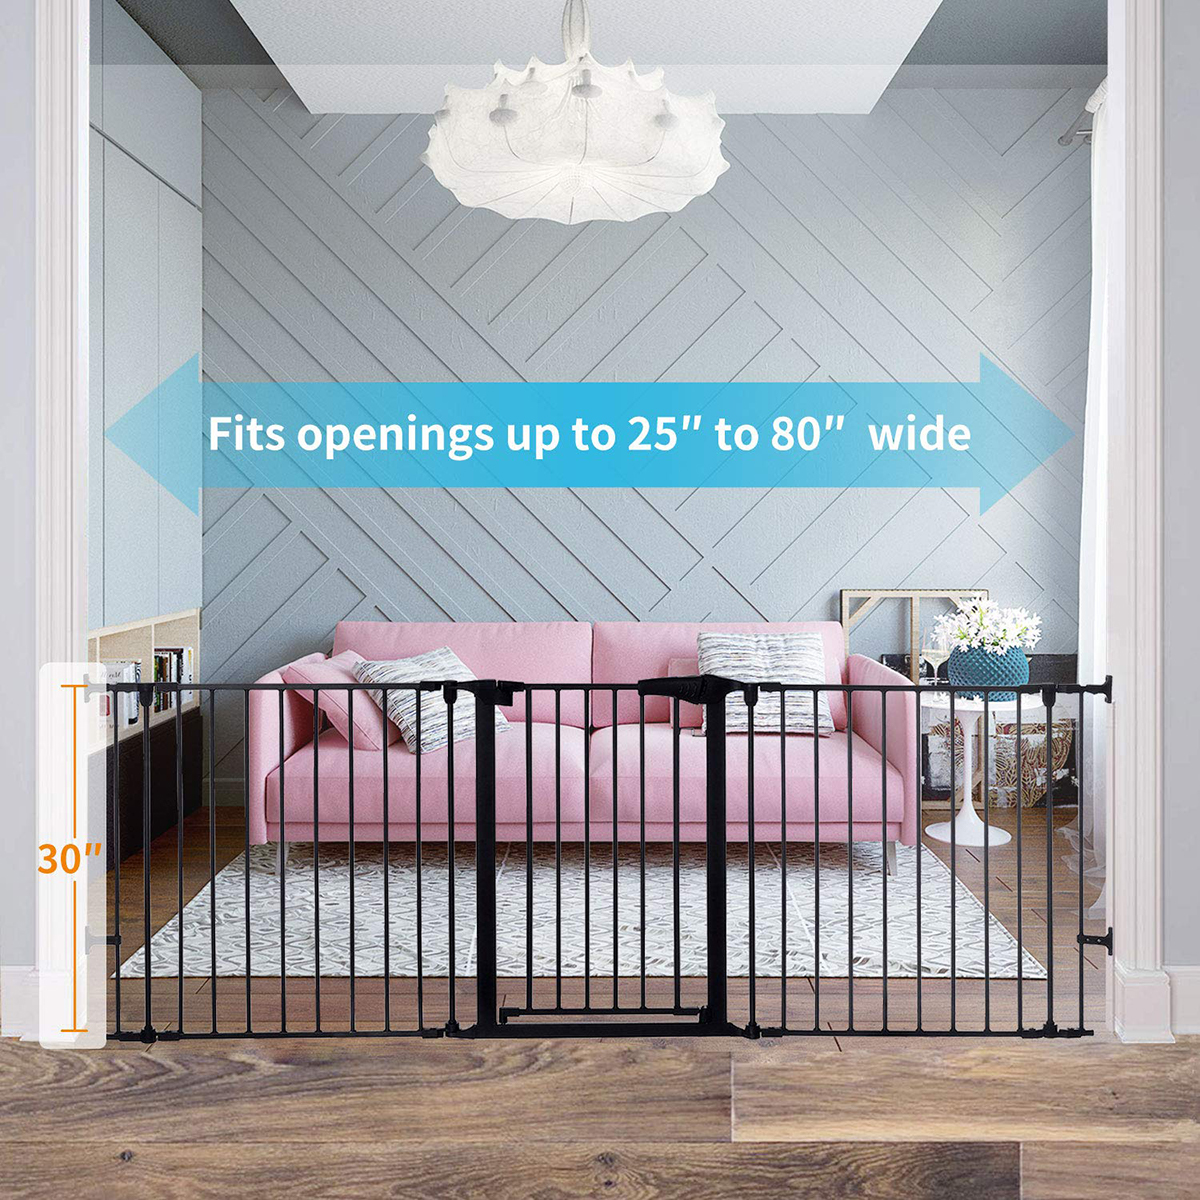 KINGSO White/Black Adjustable Auto Close Metal Baby Gate with Swing Door For Doorway Stairs